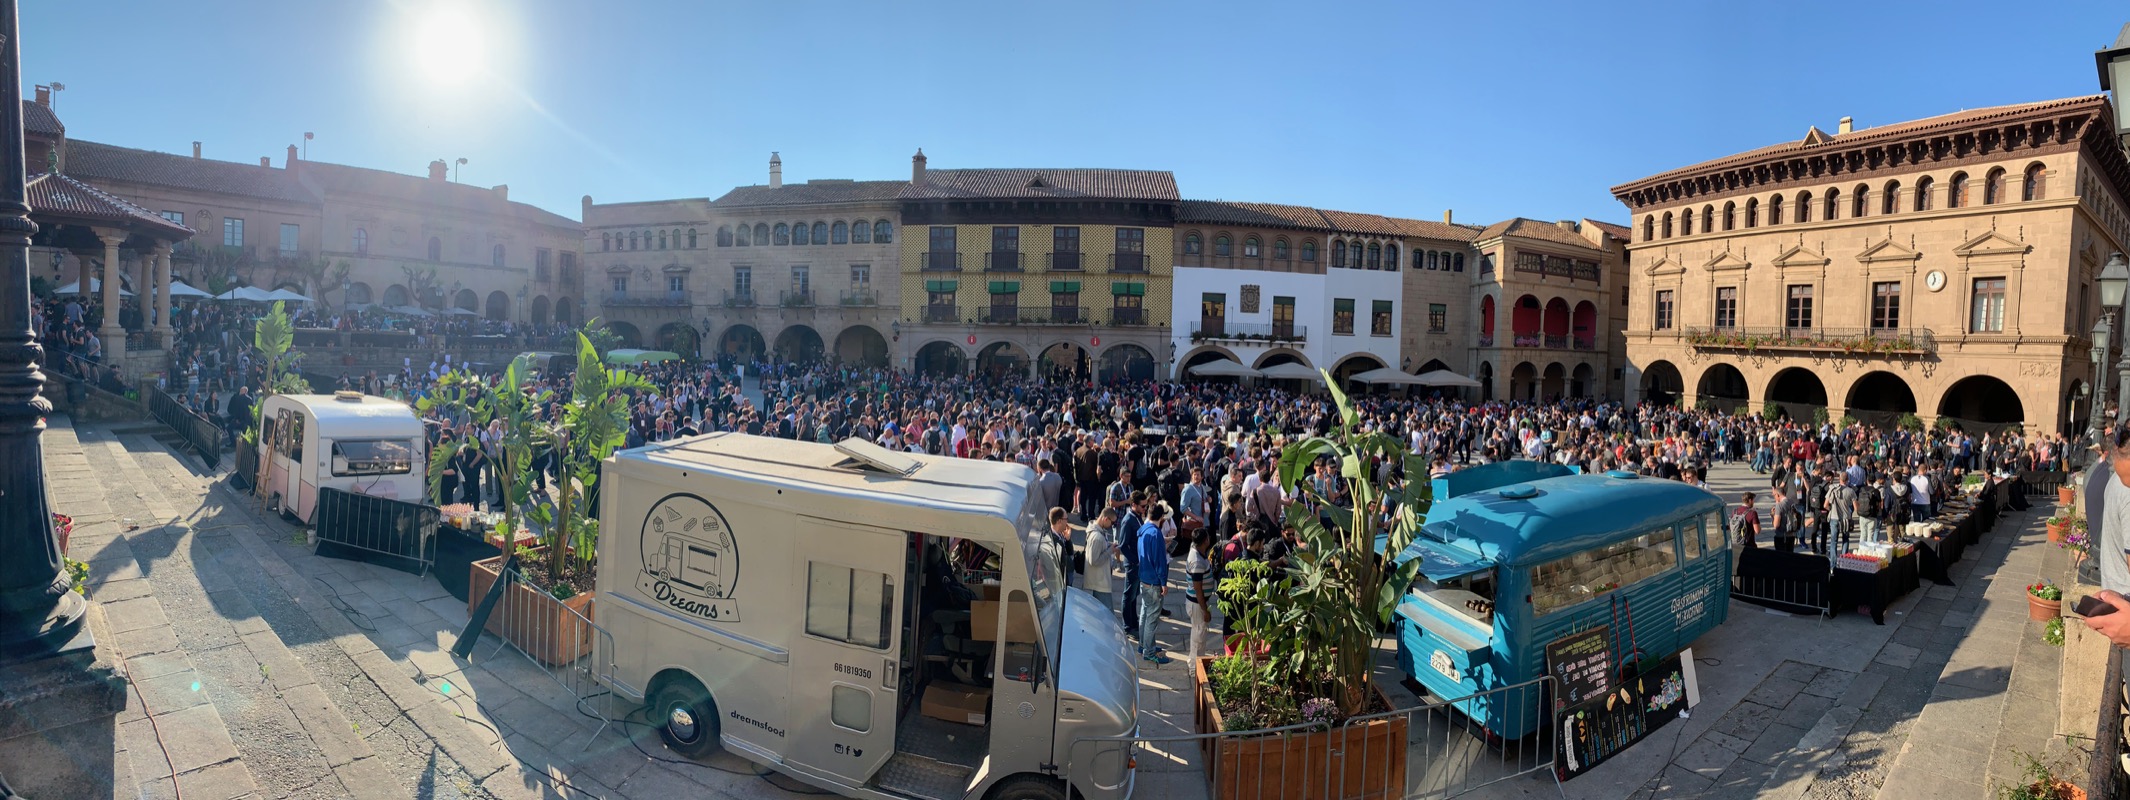 The main square of Pople Espanyol was filled to burst with KubeCon attendees.